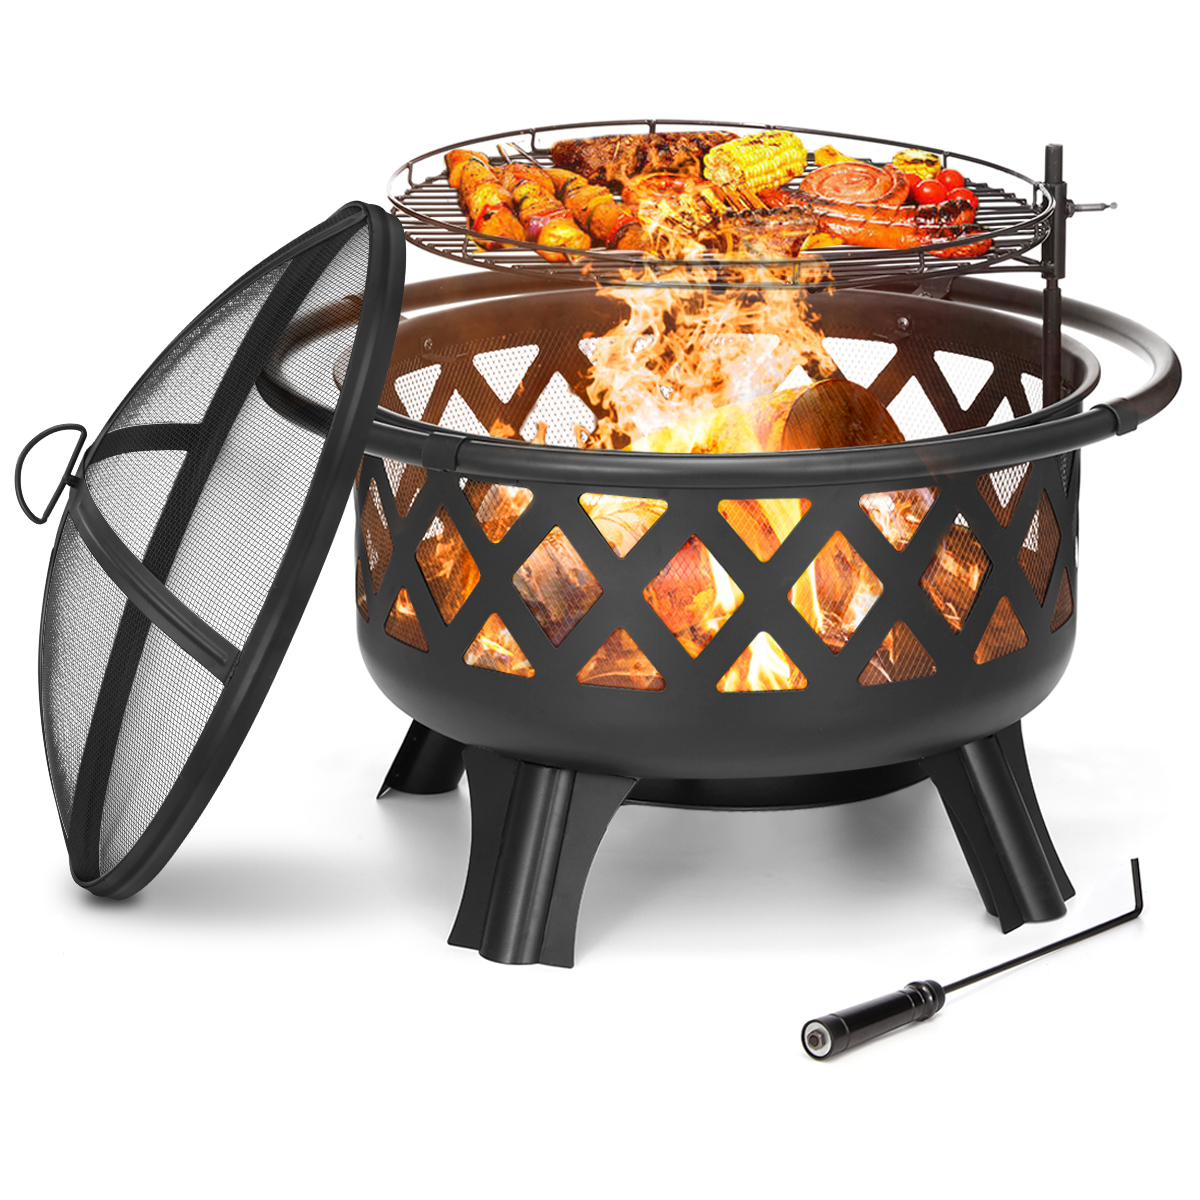 22’’Fire Pit Bowl Wood Burning with Protective Grille & Poker Multifunctional for Heating/BBQ Garden Patio Fire Pot,Portable BBQ Grill for Camping Beach Bonfire Picnic Garden 